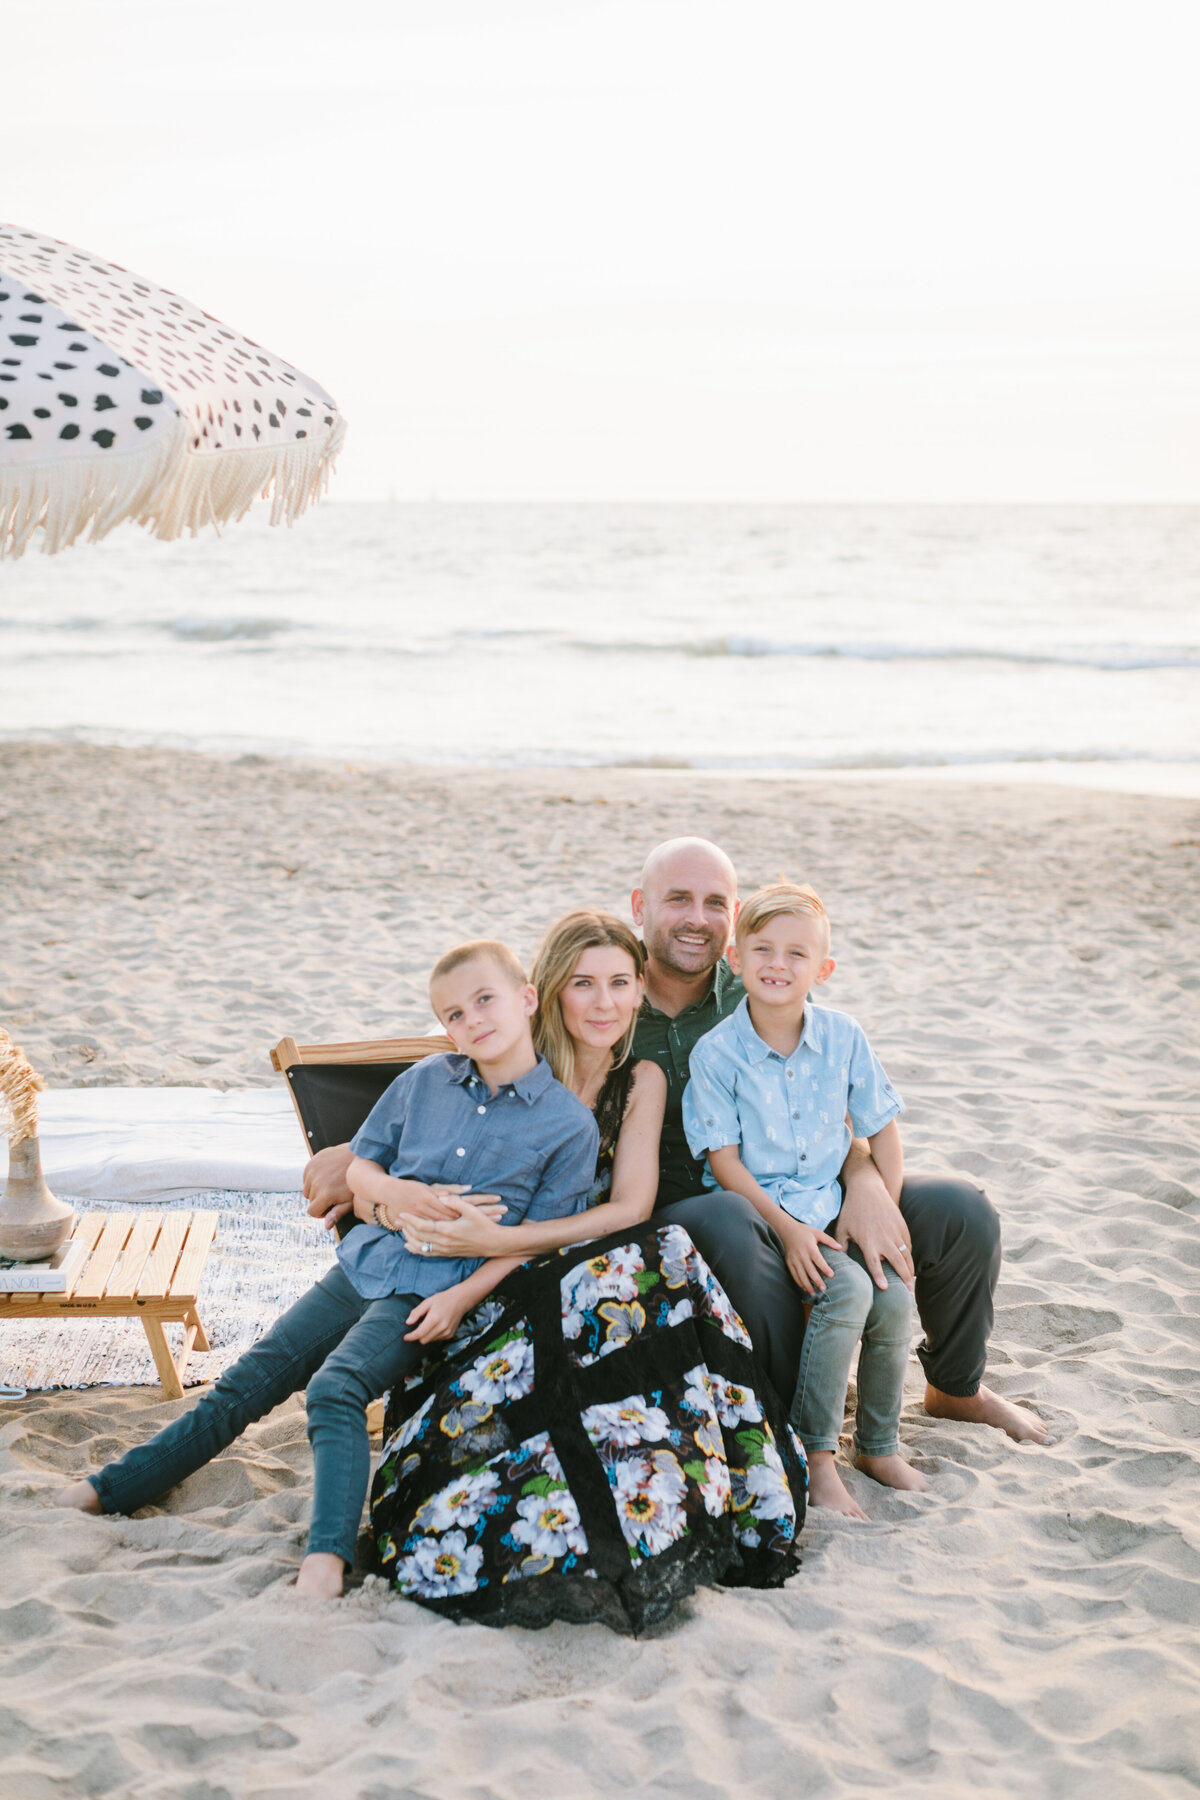 Best California and Texas Family Photographer-Jodee Debes Photography-231